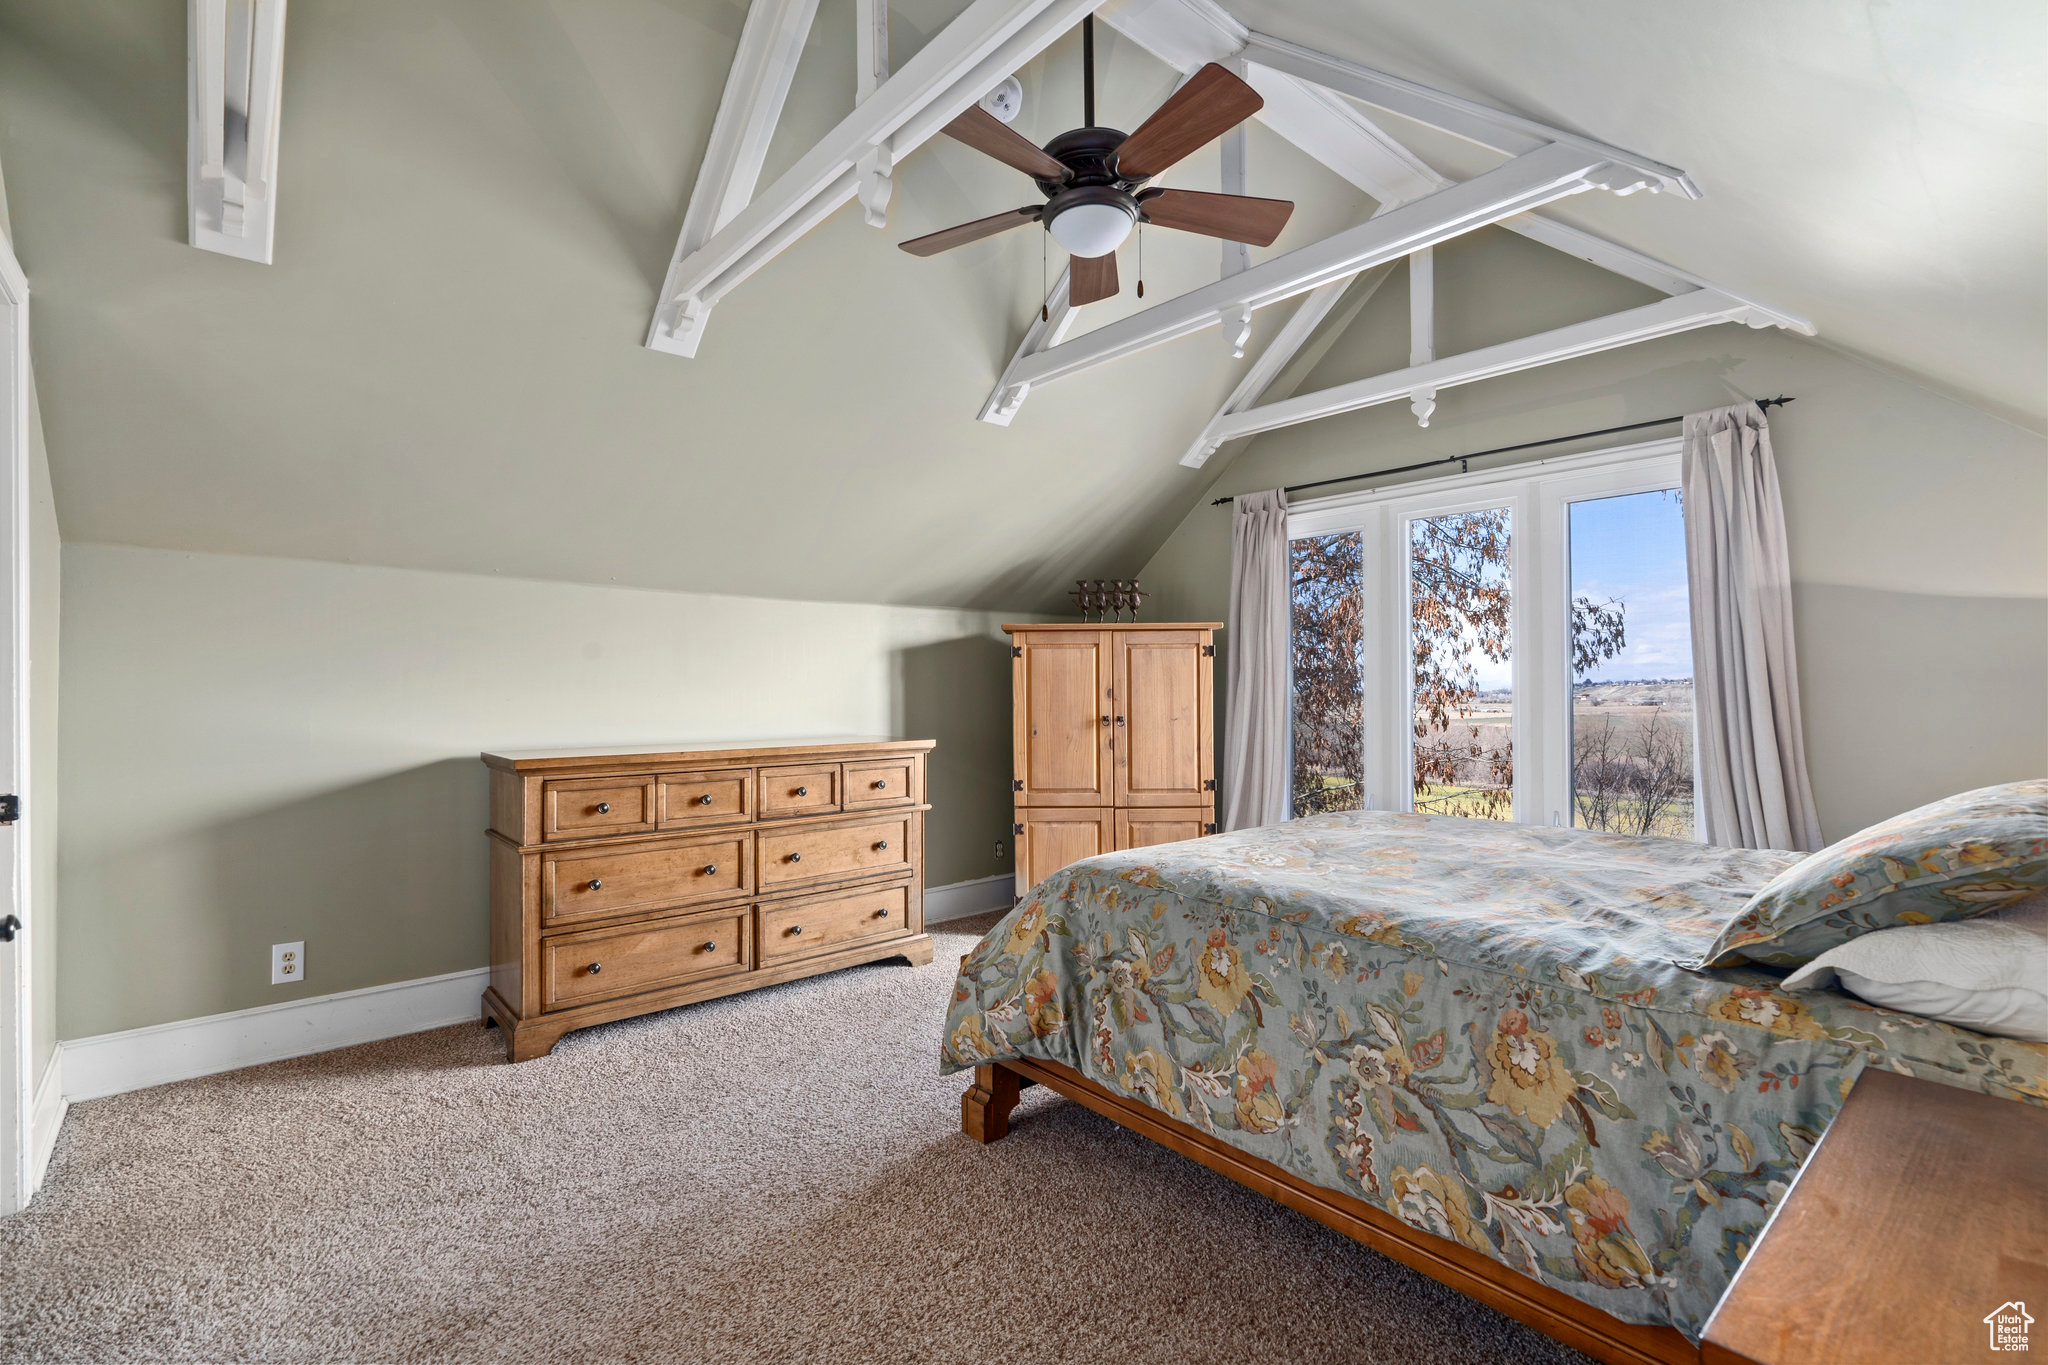 Master bedroom is on the 2nd floor. Nice views of the mountains and riverbottoms to the north.